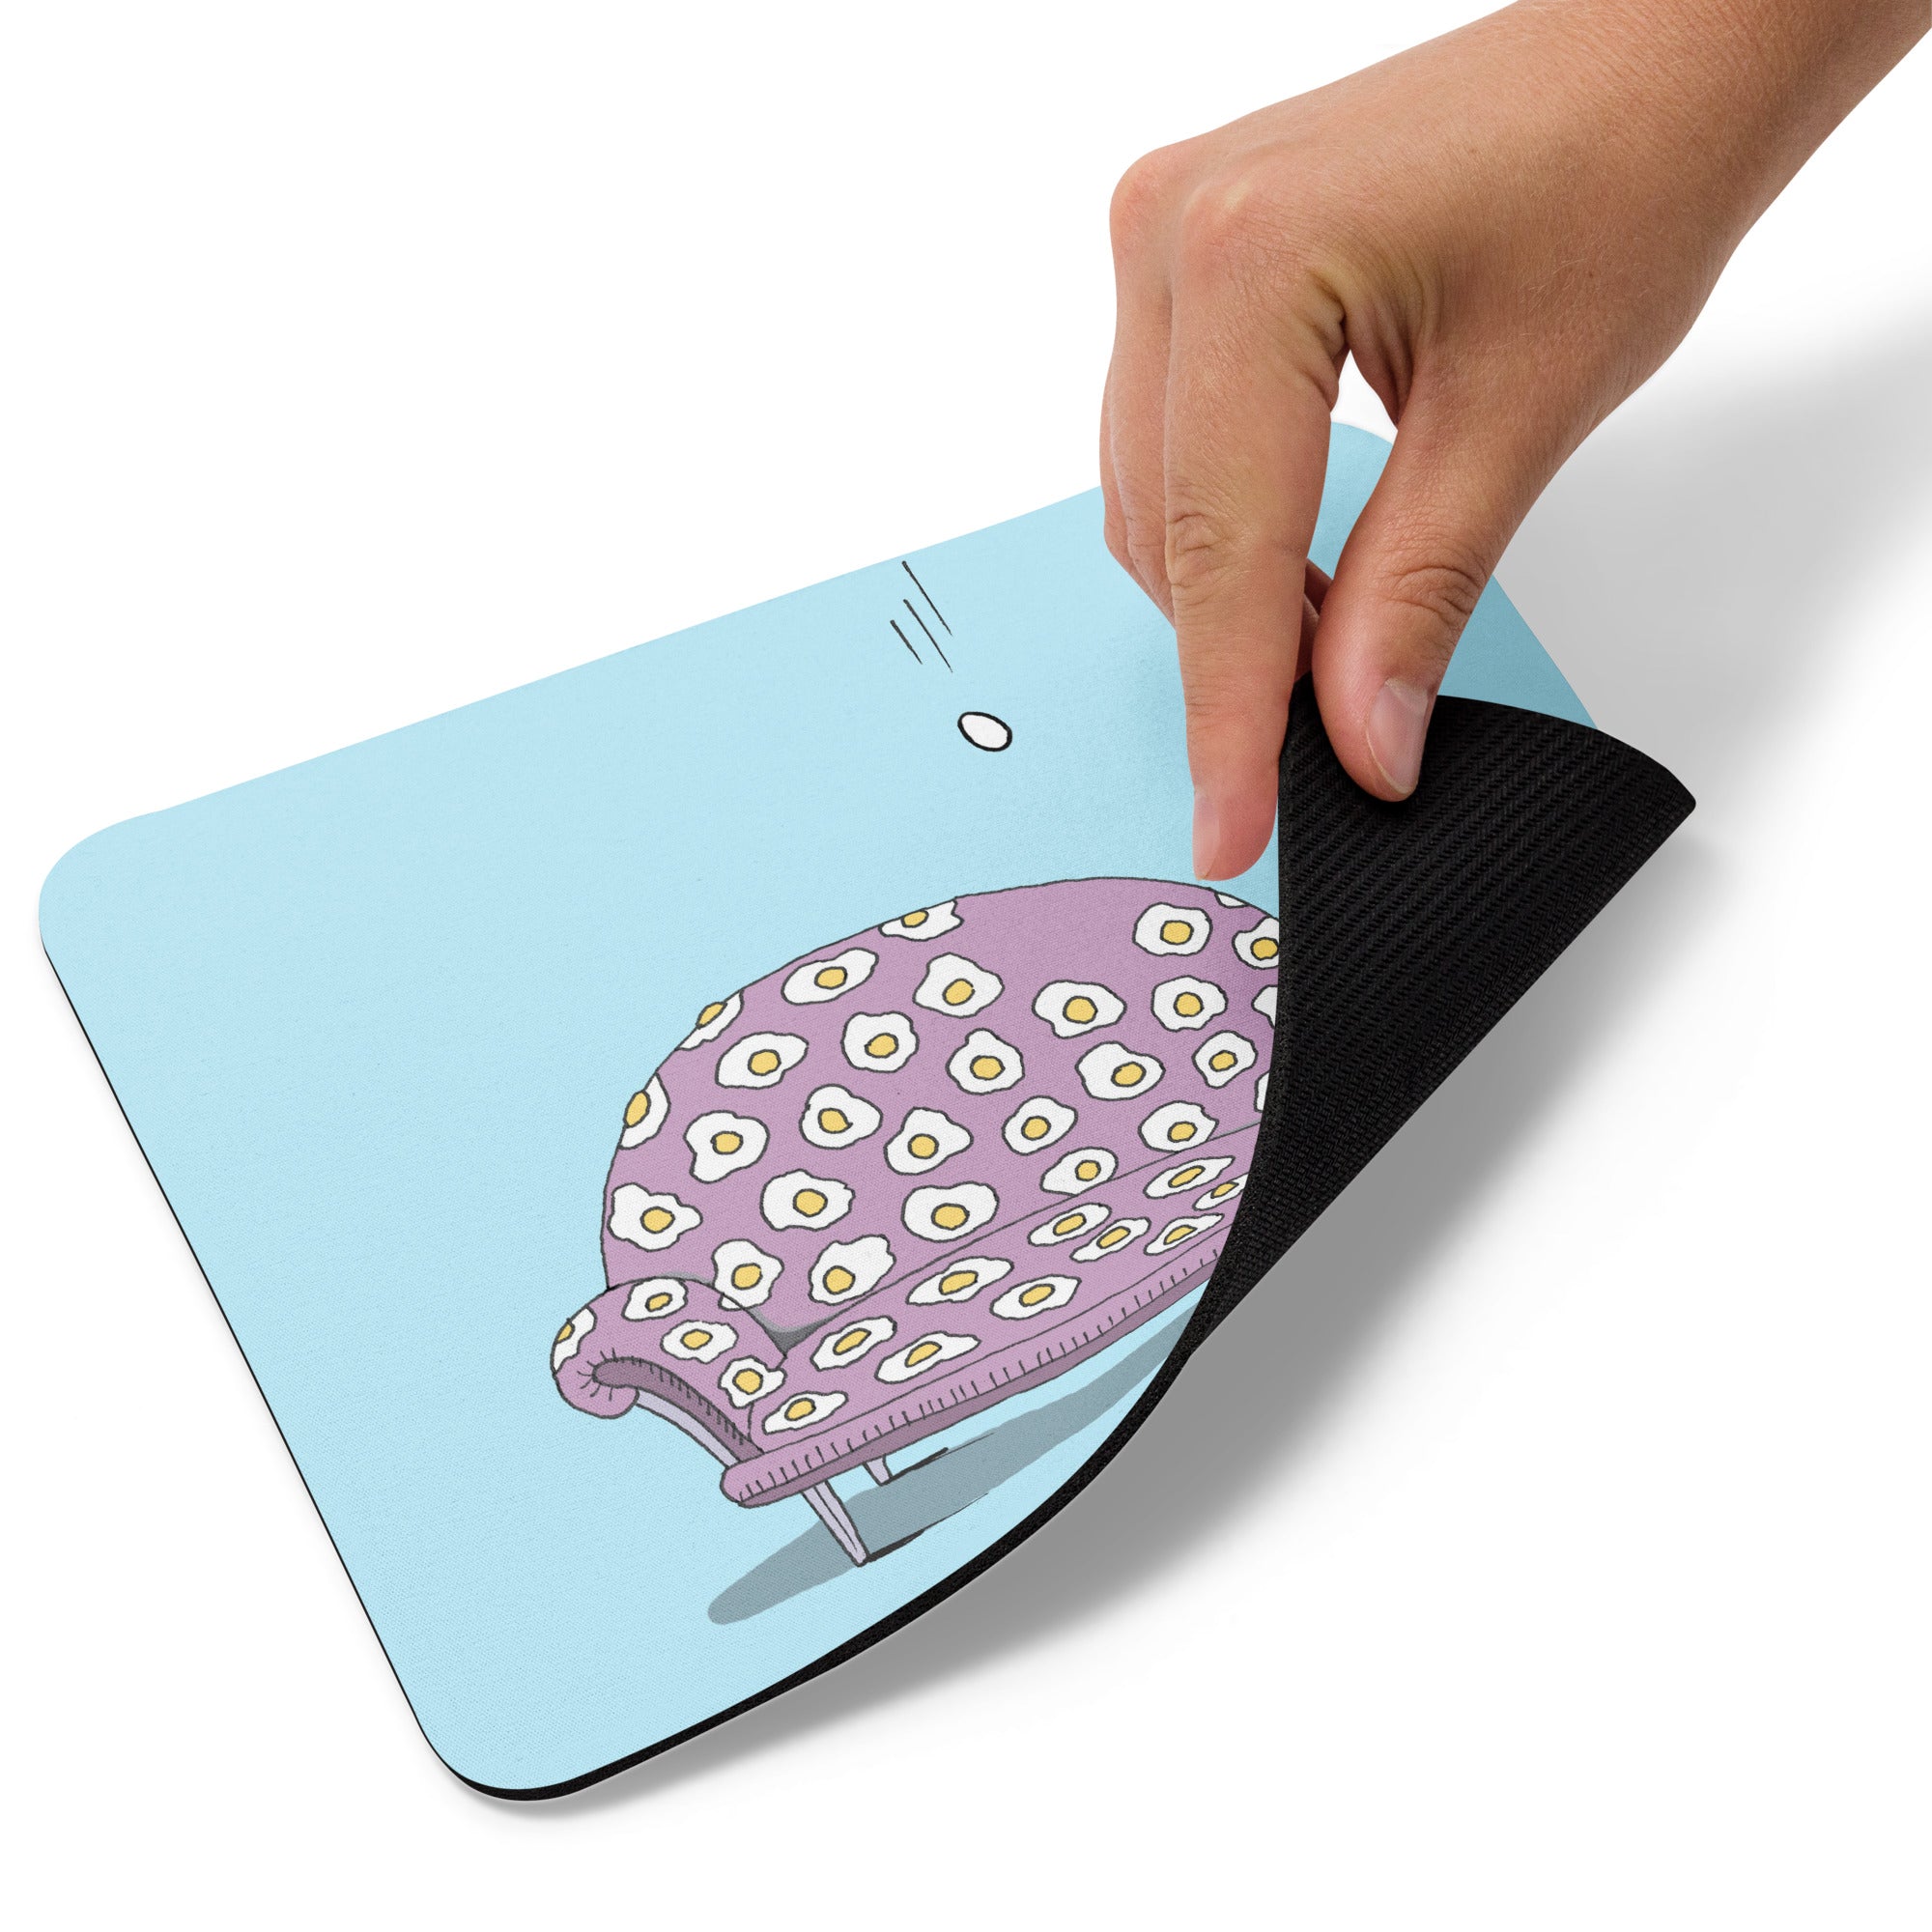 The Egg Mouse pad